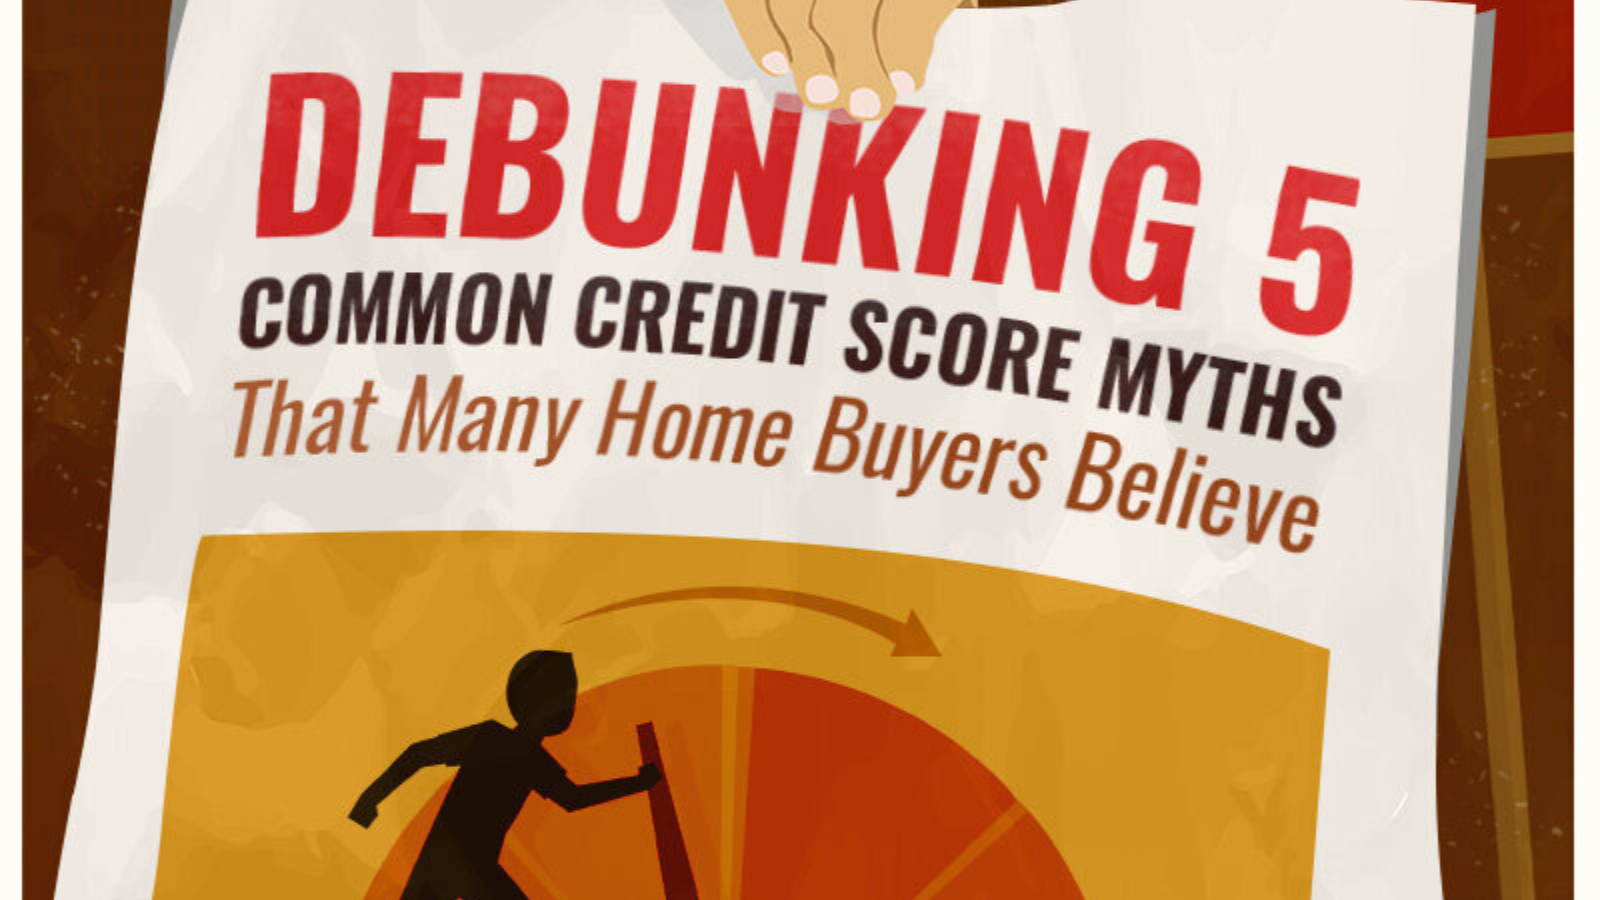 Debunking 5 Common Credit Score Myths That Many Home Buyers Believe